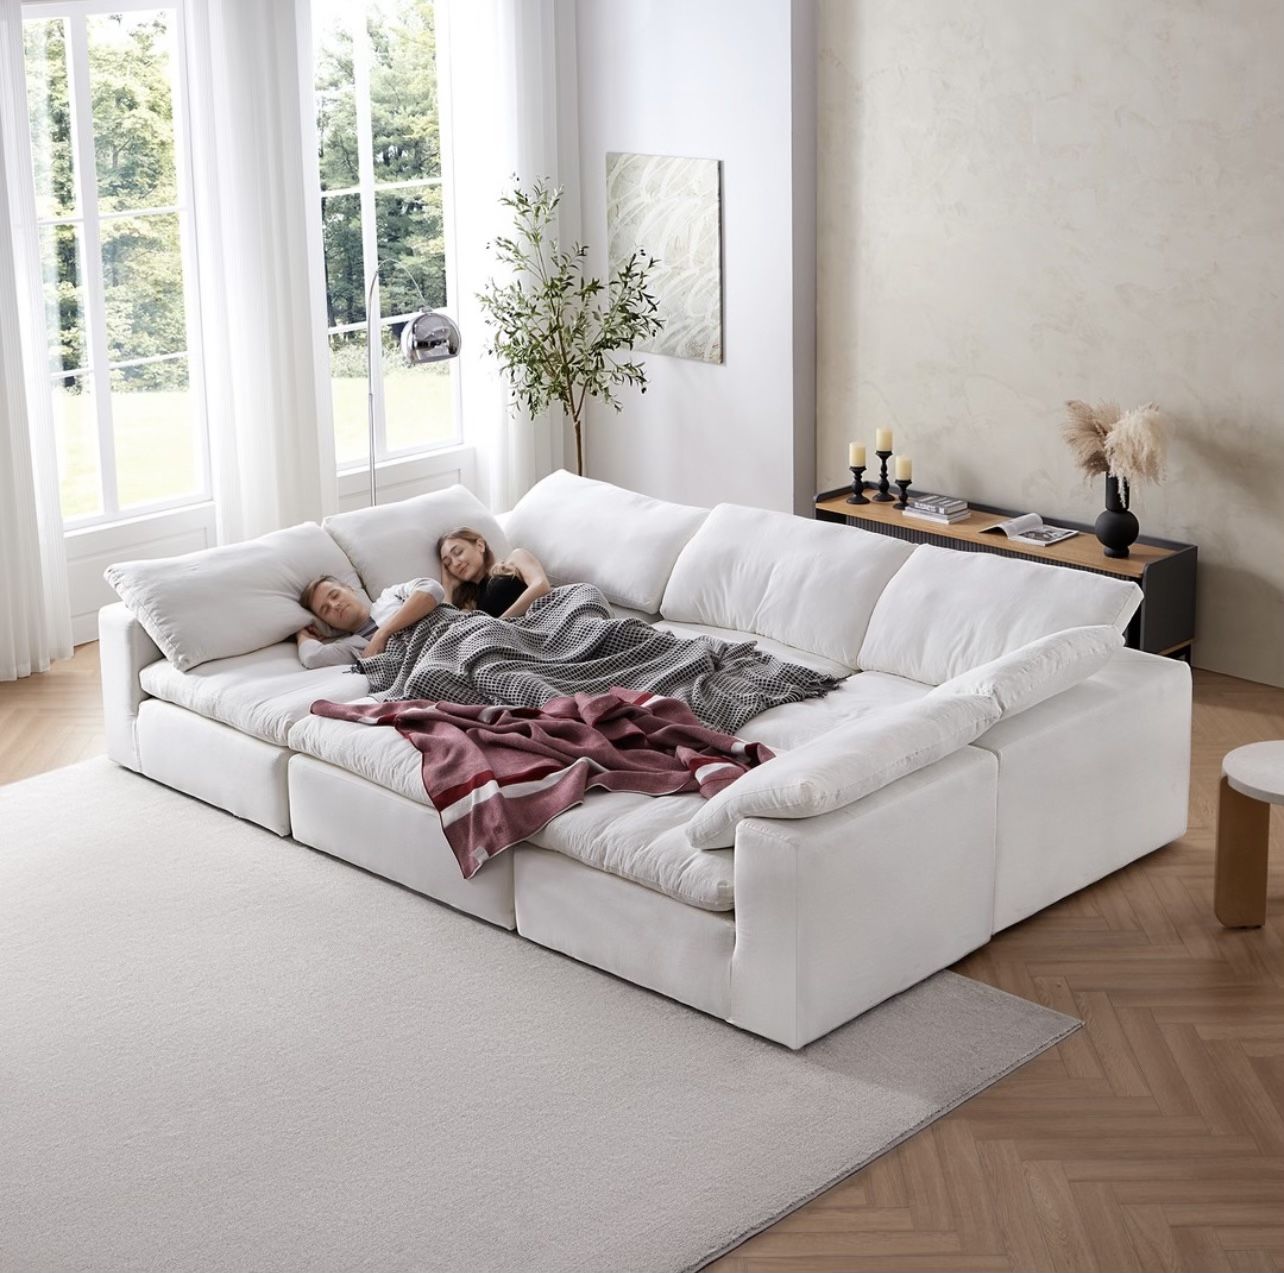 Modular Sectional  Sofa Bed - Cloud Couch☁️ Free Delivery ✅ Modular Sectional Sofa Cloud Couch White 